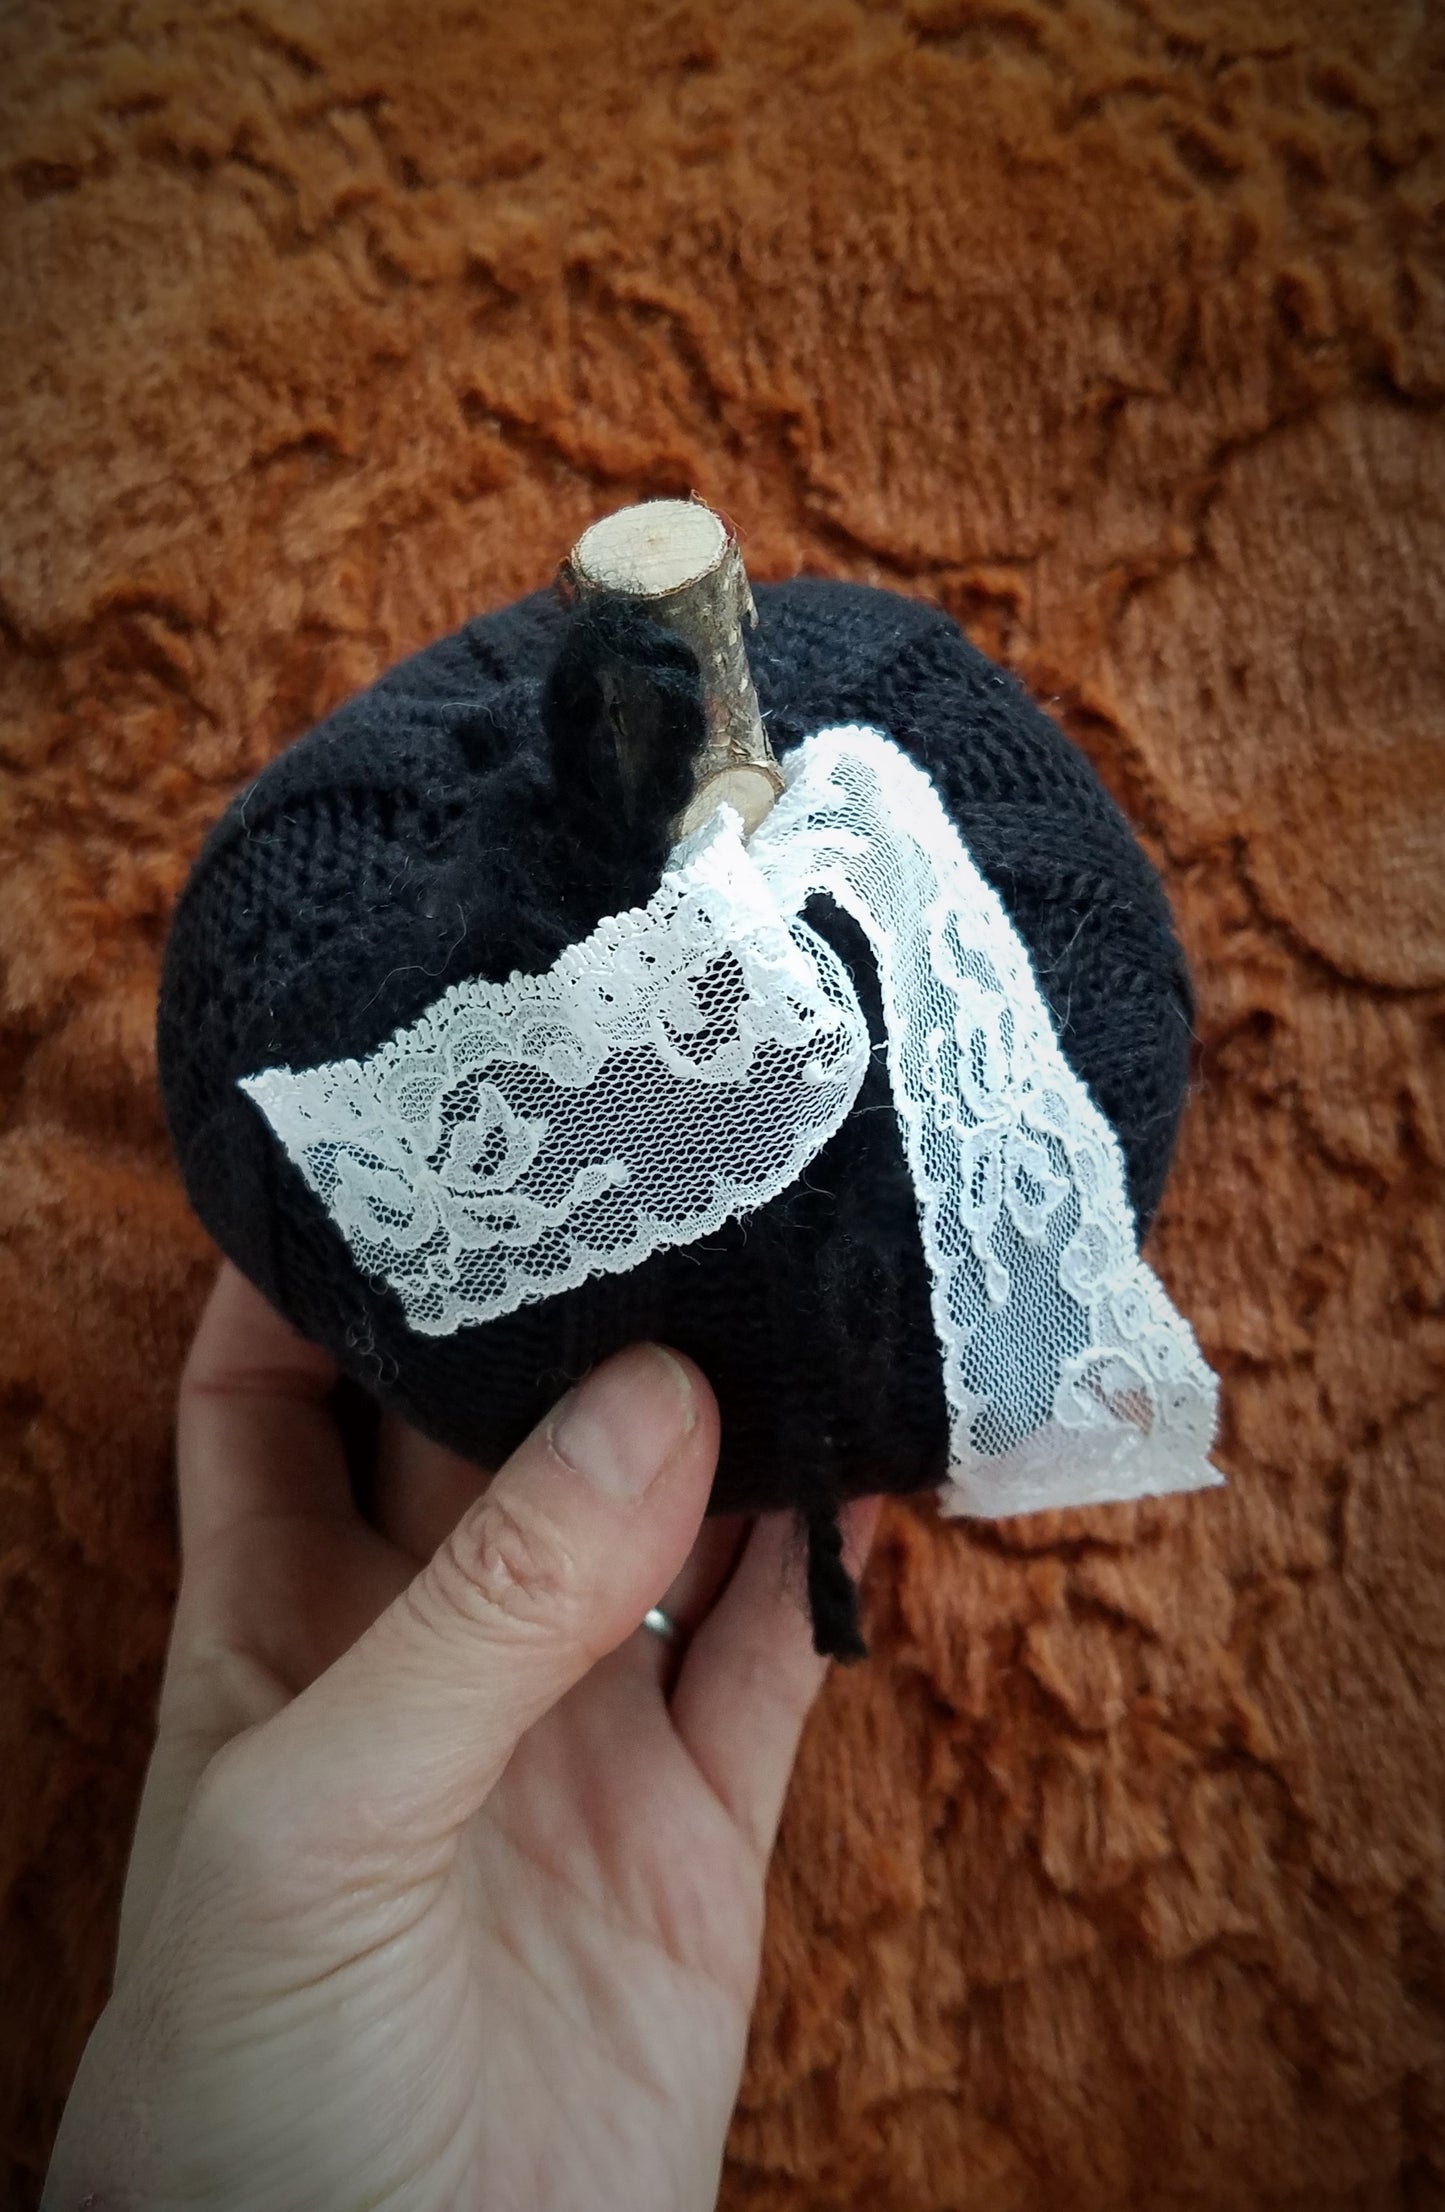 Knit Mini Pumpkin Pillow Pouf in Black with Ivory Lace and Wooden Stem